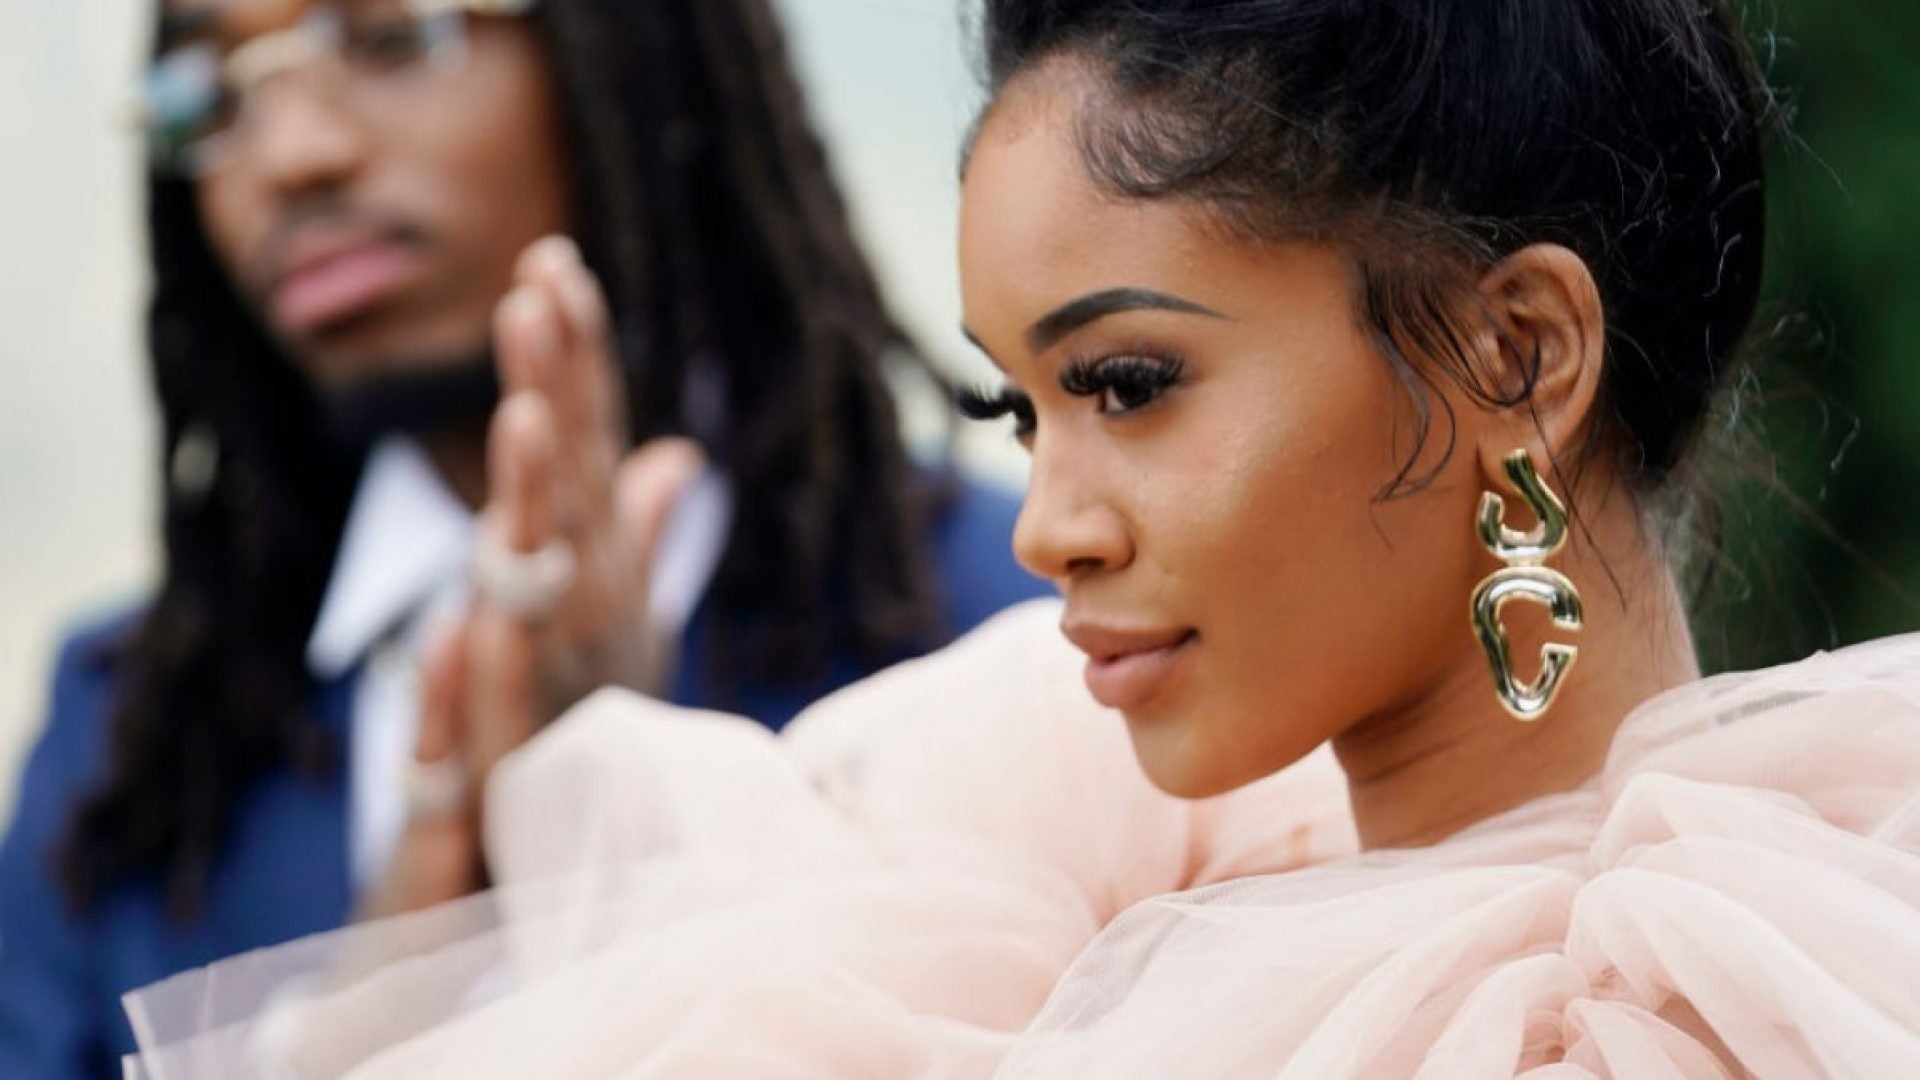 The Internet Is Outraged By A Video Showing Saweetie and Quavo In A Physical Altercation